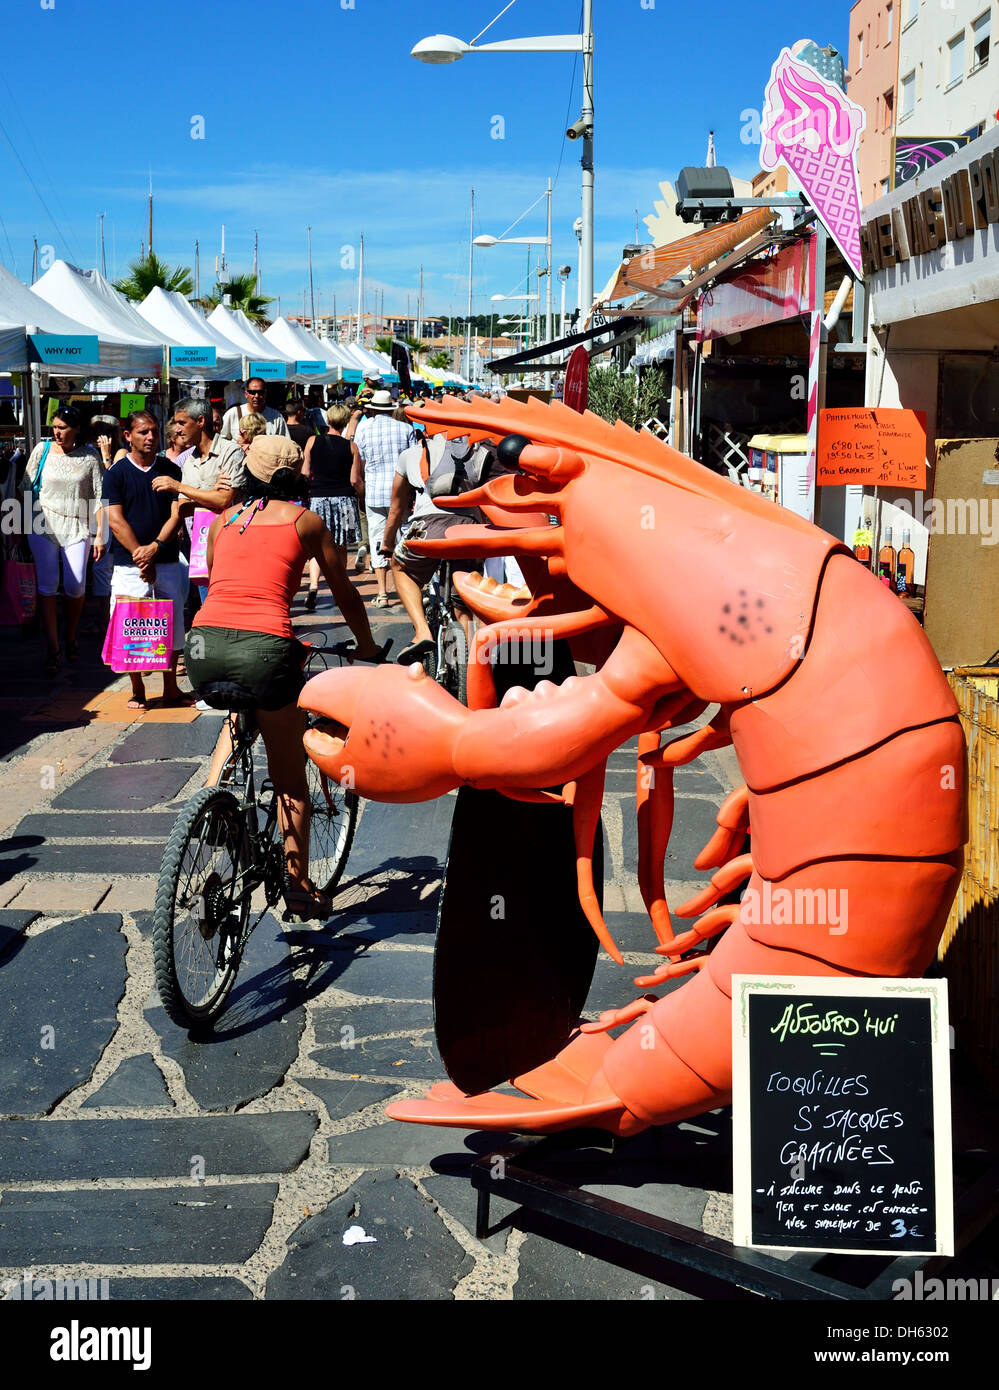 Large advertising langoustine appears to be pinching bottom of passing cyclist, Cap D'Agde, France Stock Photo